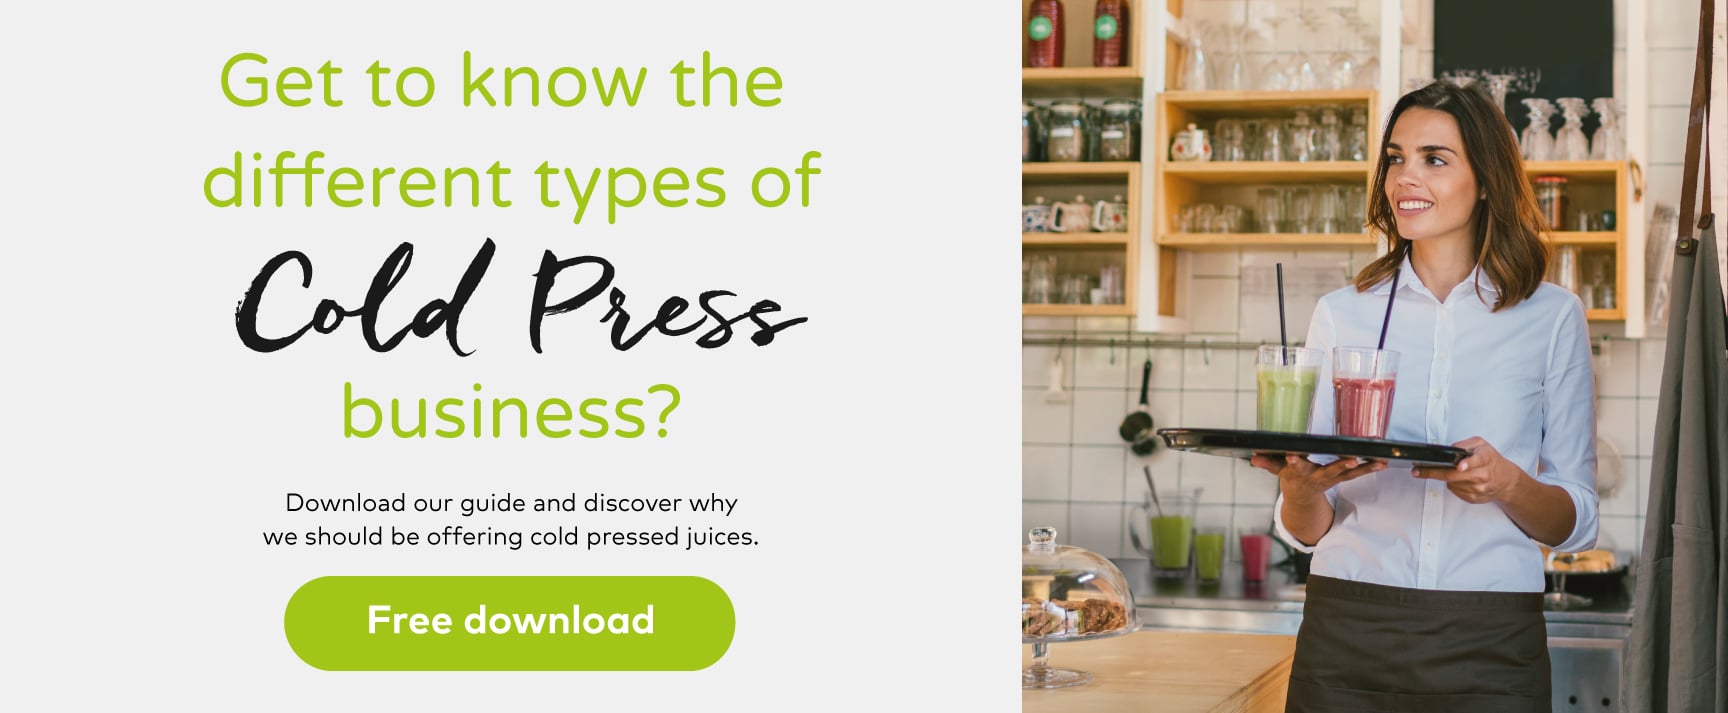 Cold Press business basic guide